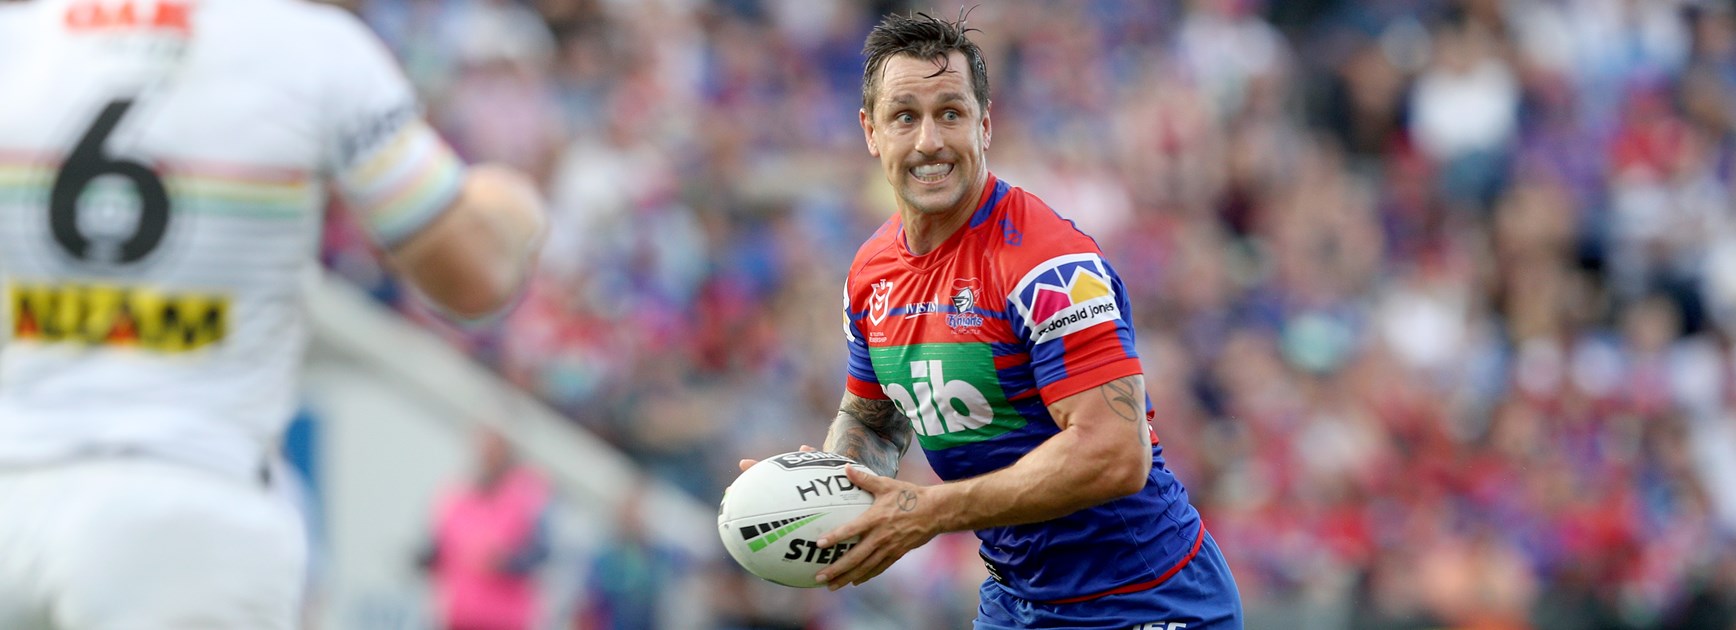 The factor that could work in Pearce's favour